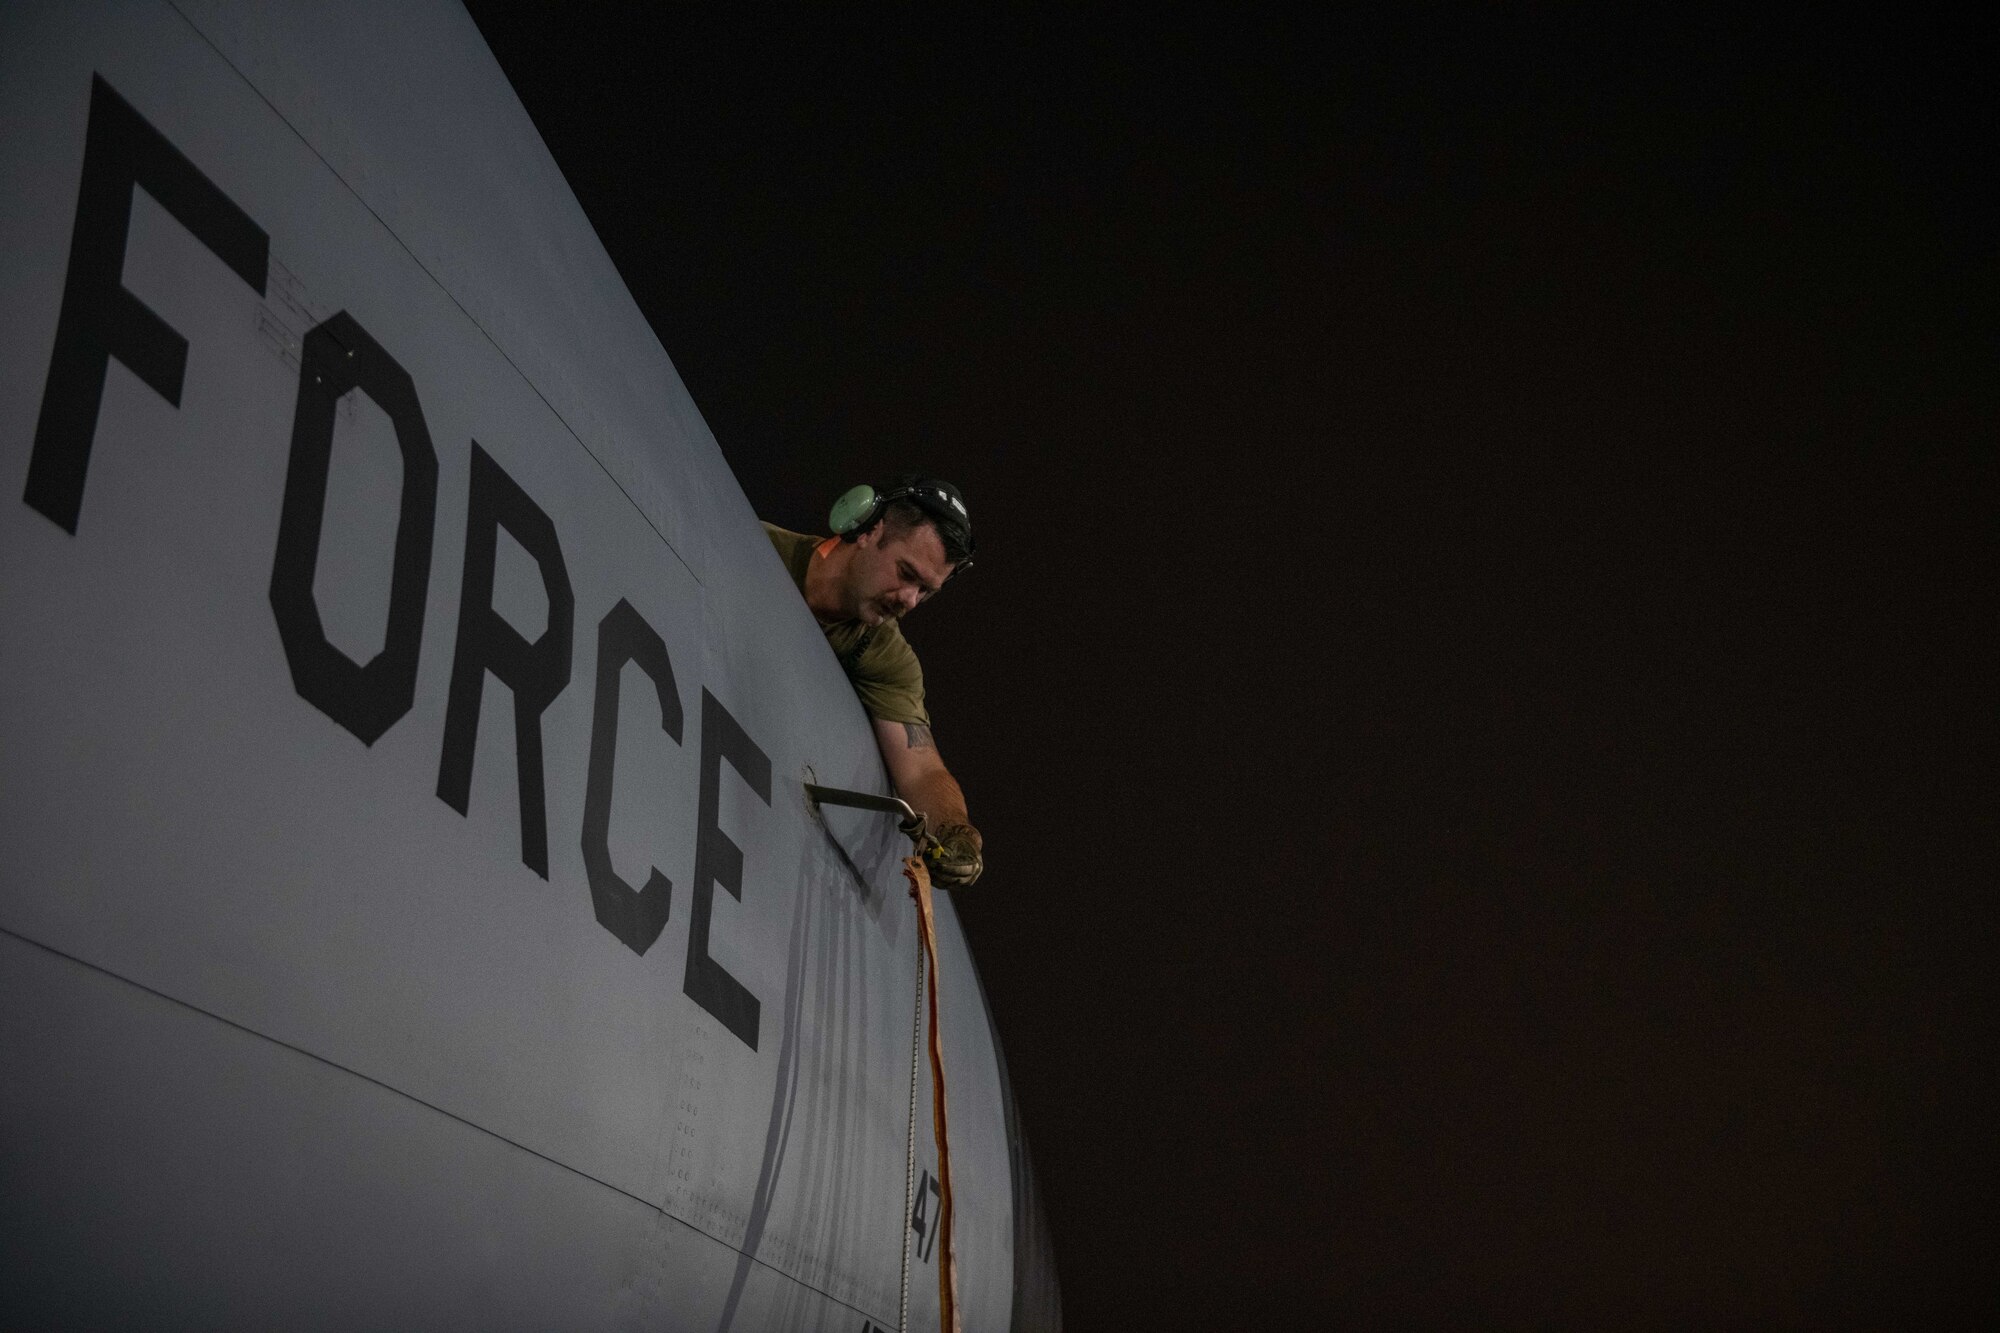 U.S. Air Force Staff Sgt. Nicholas Kinder, a KC-135 maintainer with the 379th Expeditionary Air Maintenance Squadron, secures a protective cover to a sensor on a KC-135 on Al Udeid Air Base, Qatar, Aug. 1, 2022. Aircraft maintainers operate constantly to support missions at any time of day. (U.S. Air National Guard photo by Airman 1st Class Constantine Bambakidis)